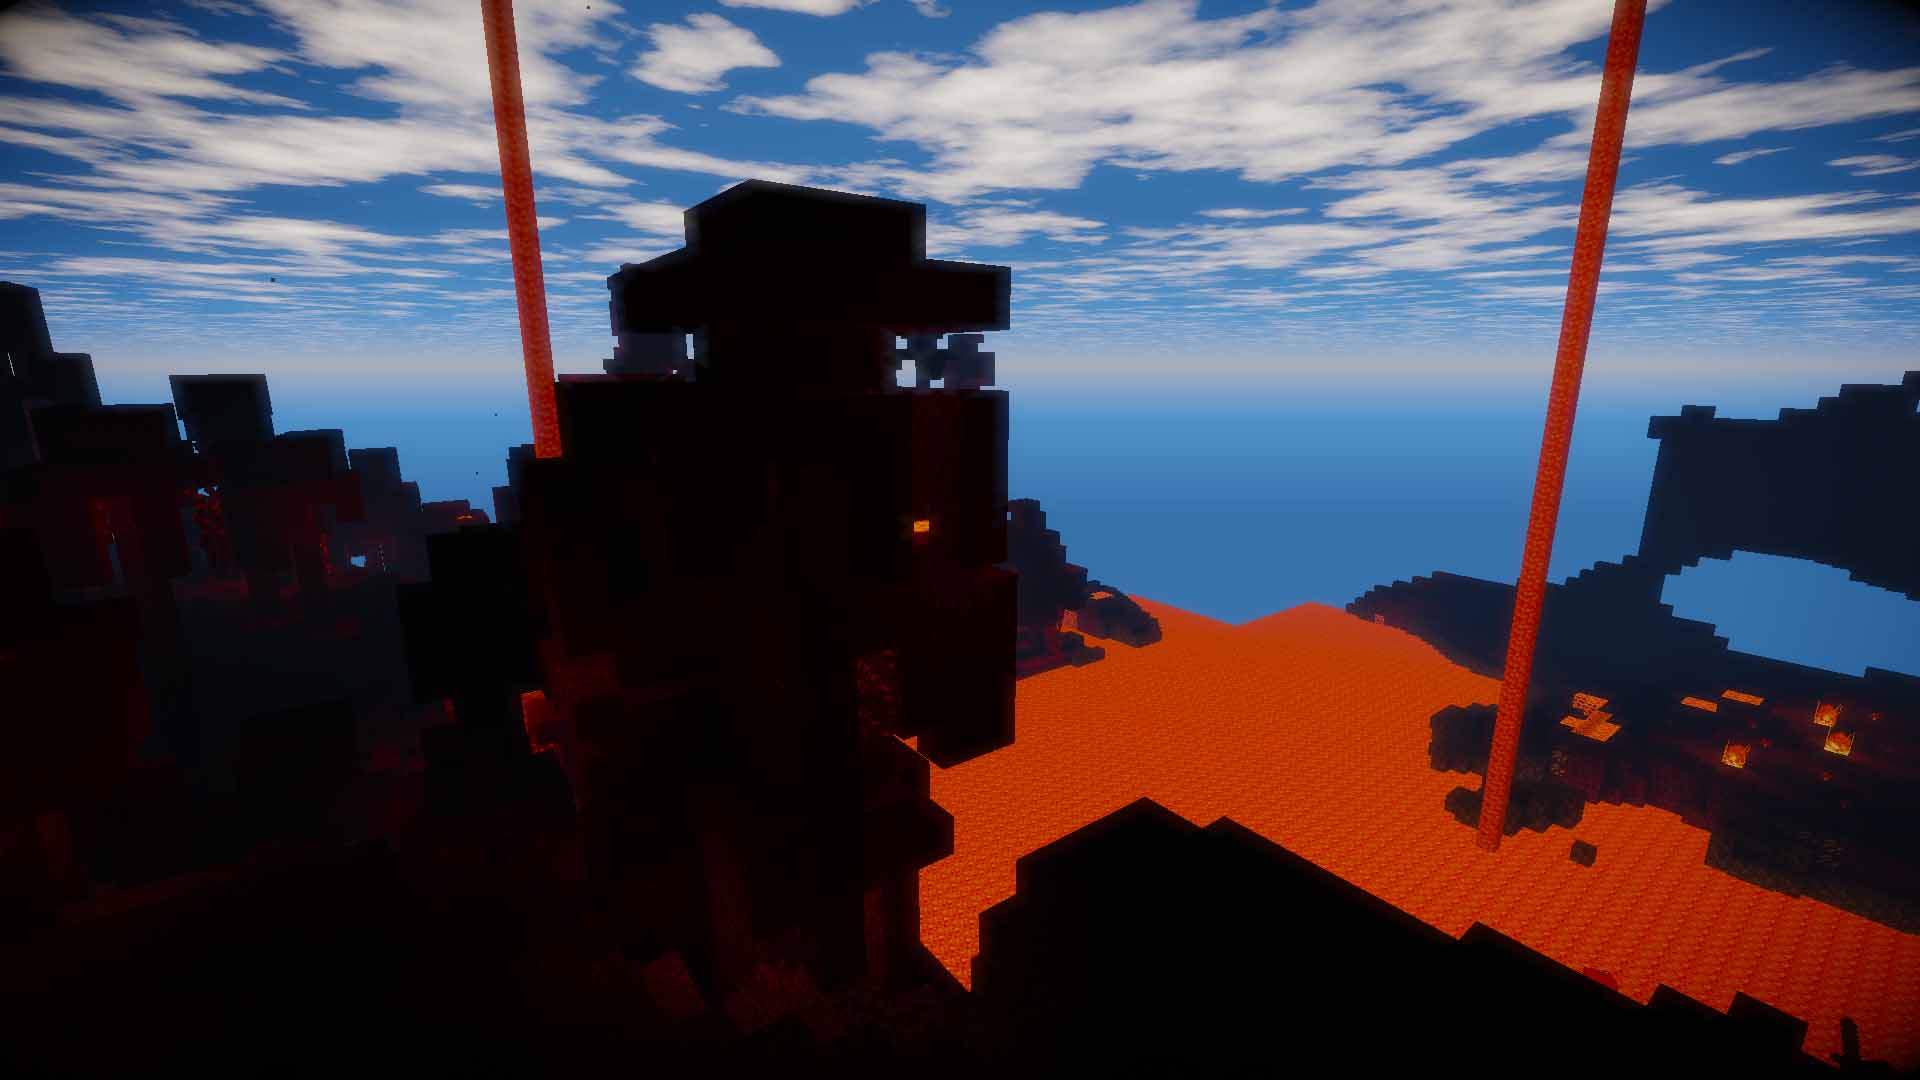 Download AirLoocke42’s Shaders Latest Version for Minecraft Java Edition for PC, learn how to install AirLoocke42’s Shaders in Minecraft graphic mods.